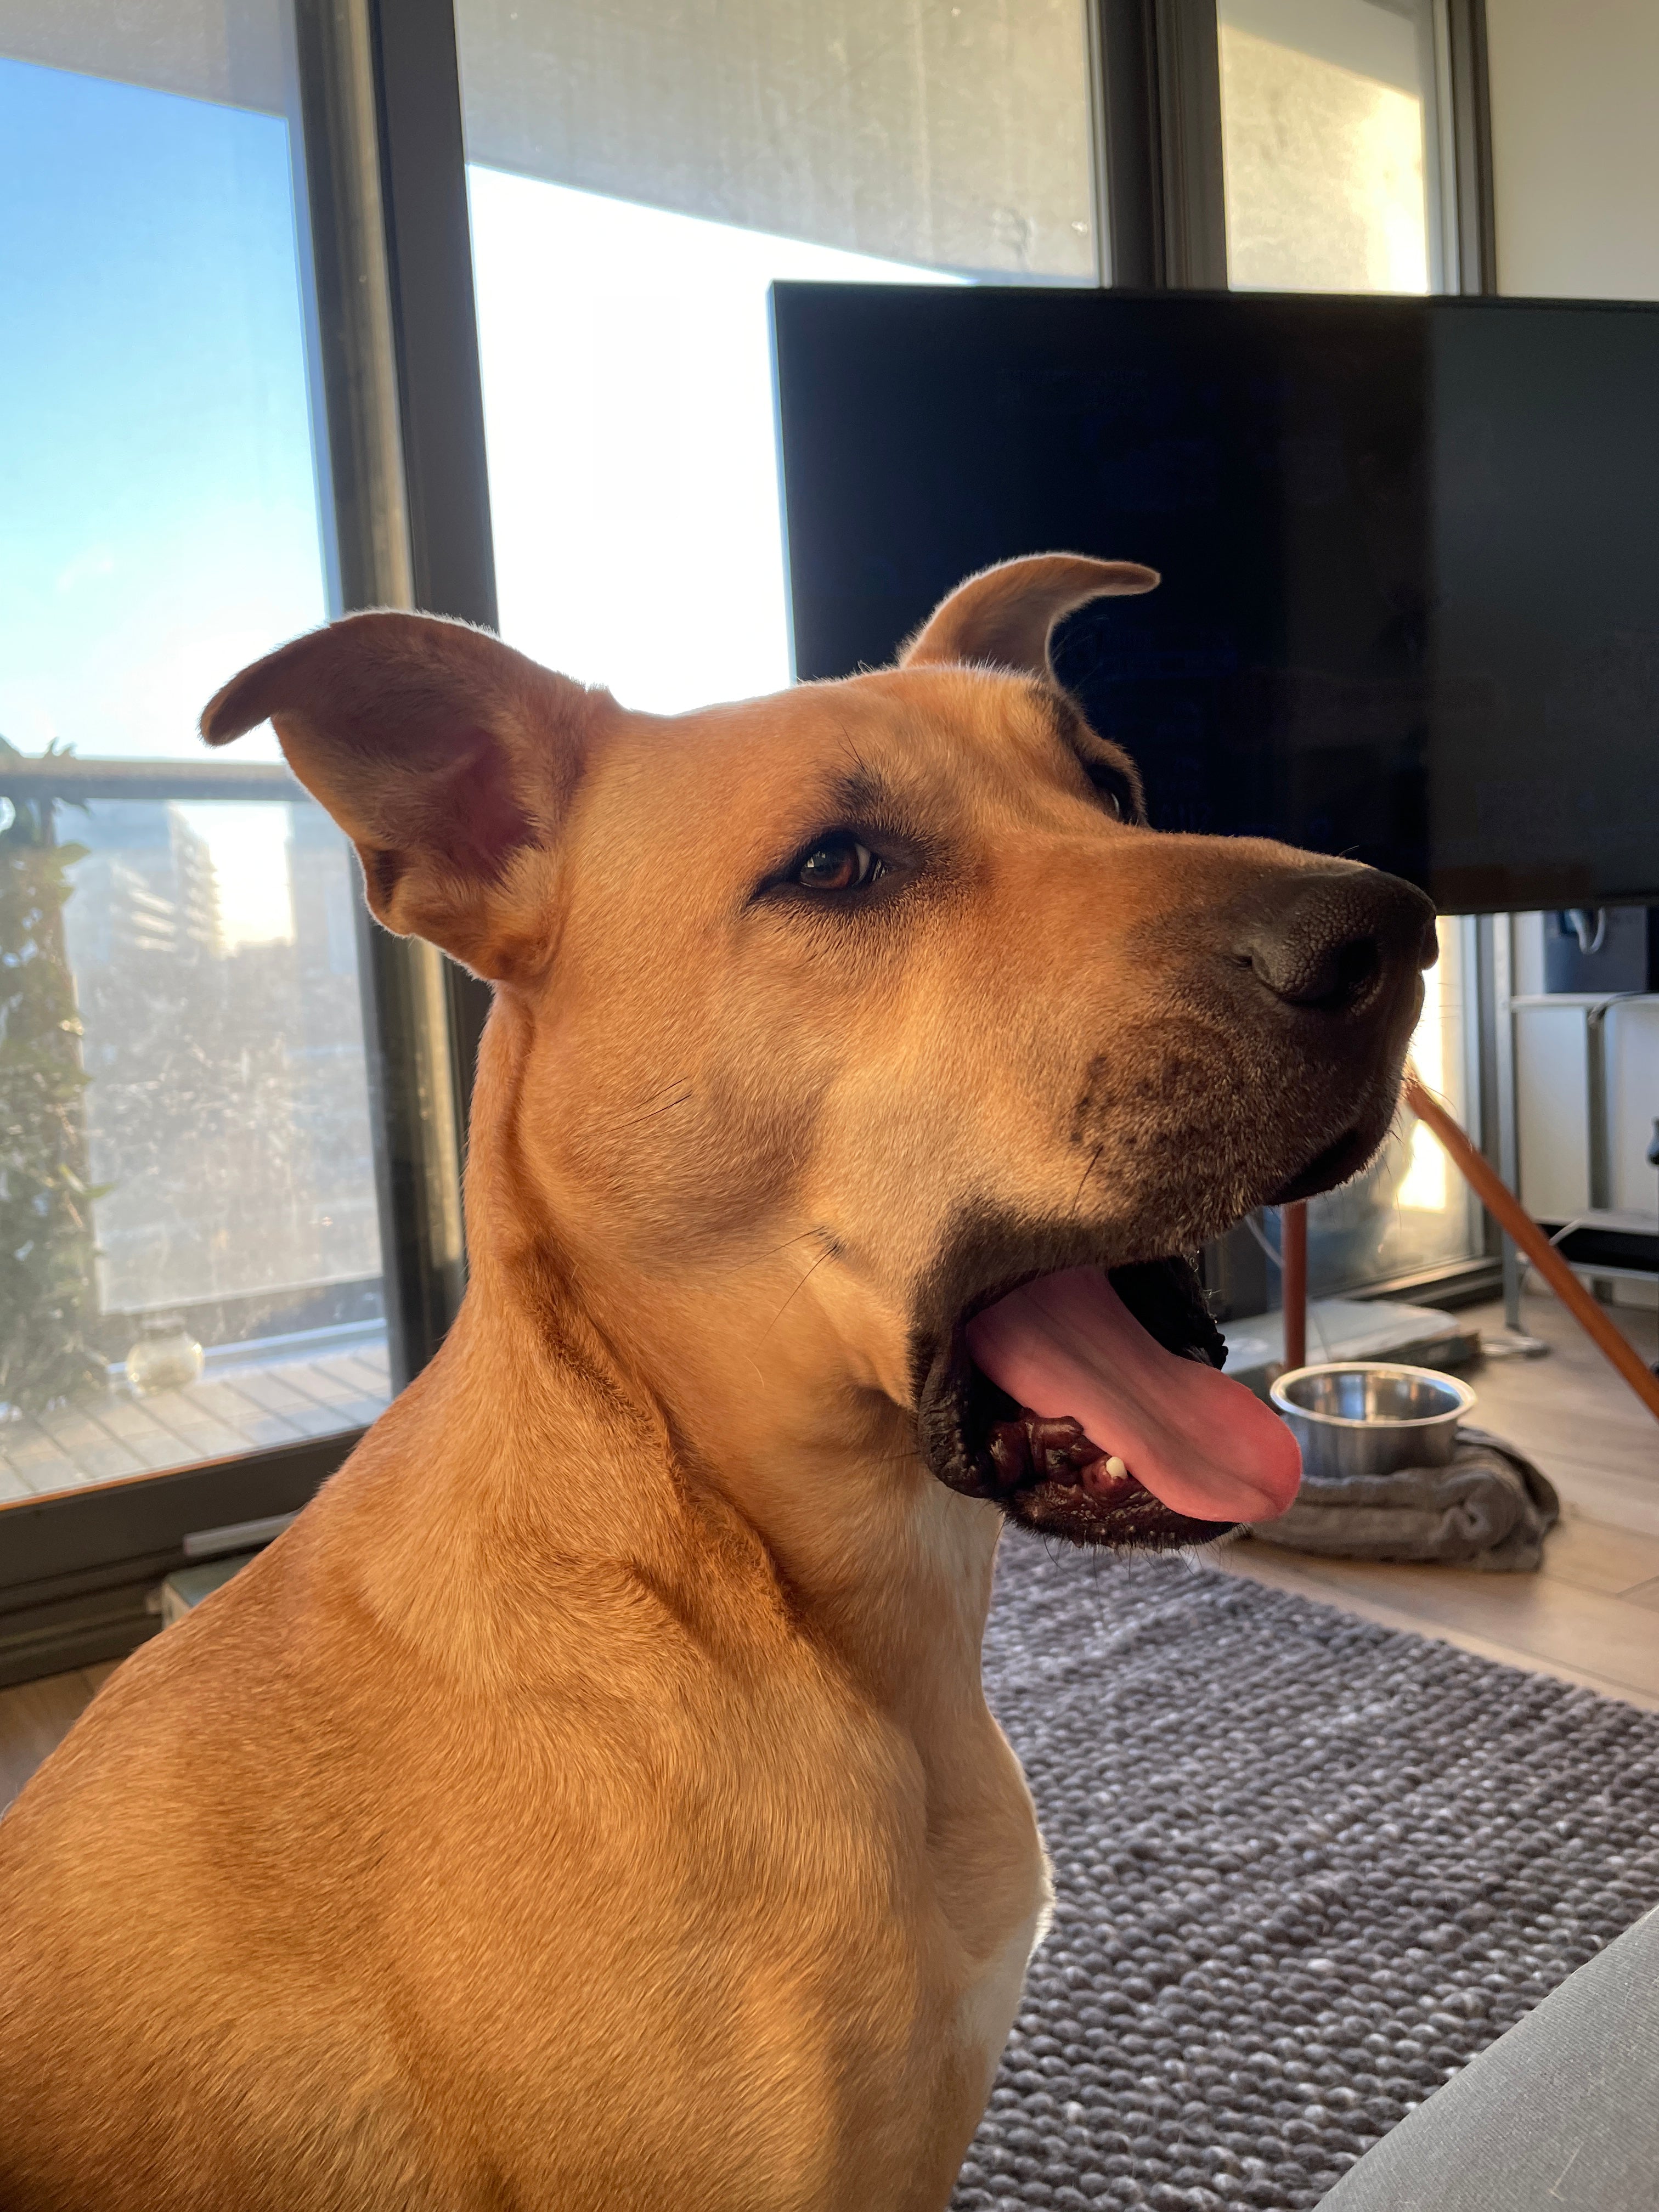 Our Story: Koa's Journey to a Happy Home